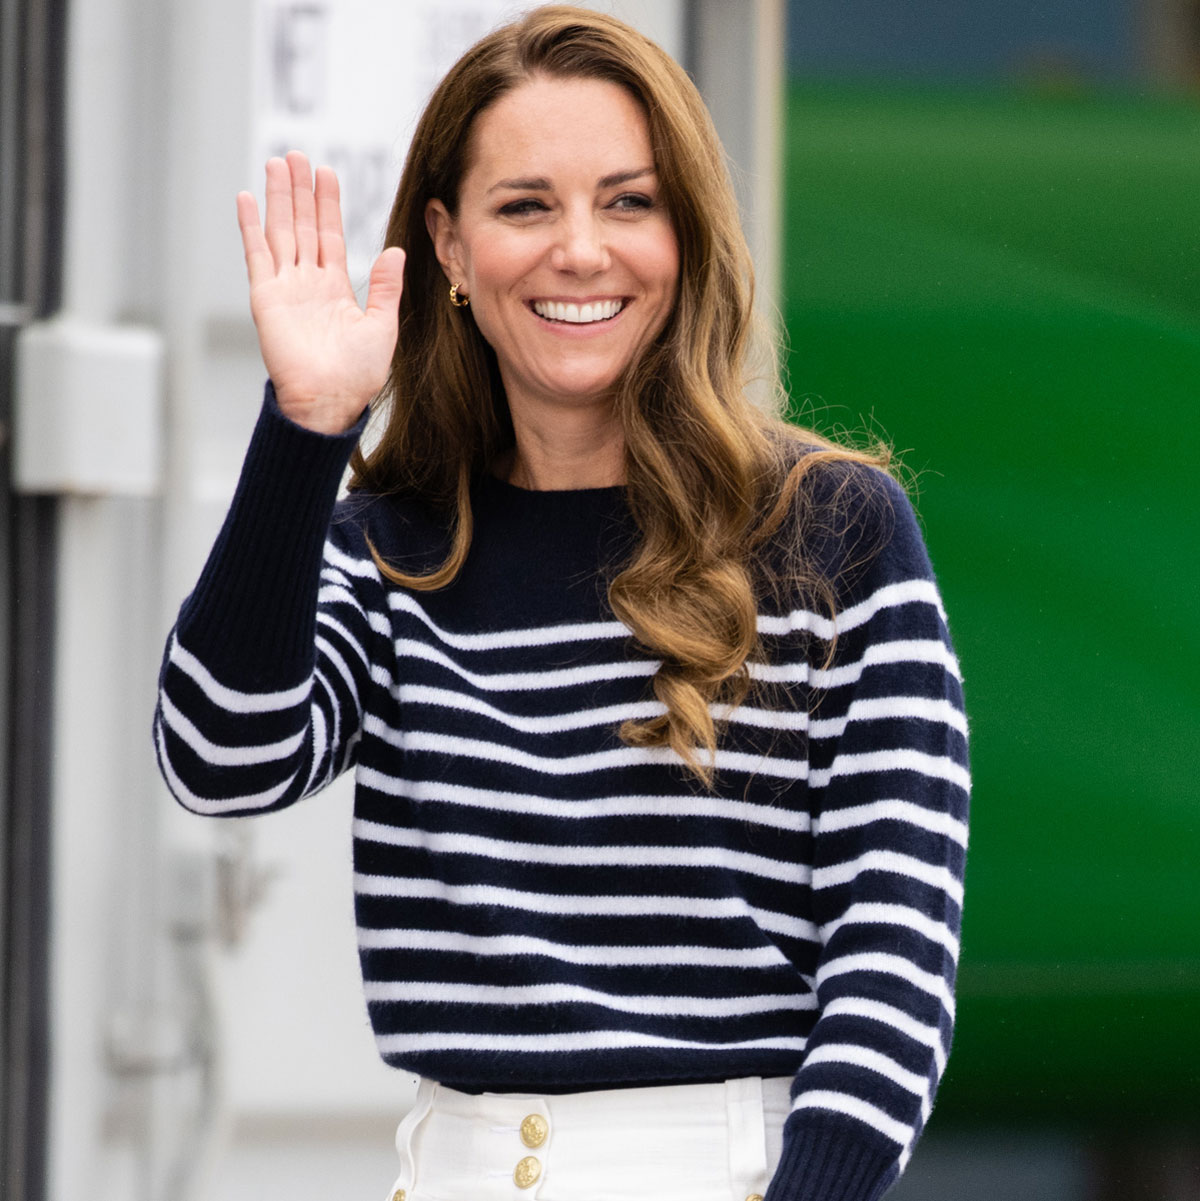 Hurry: Kate Middleton's Fave White Sneakers Are on Sale for Amazon Prime Day